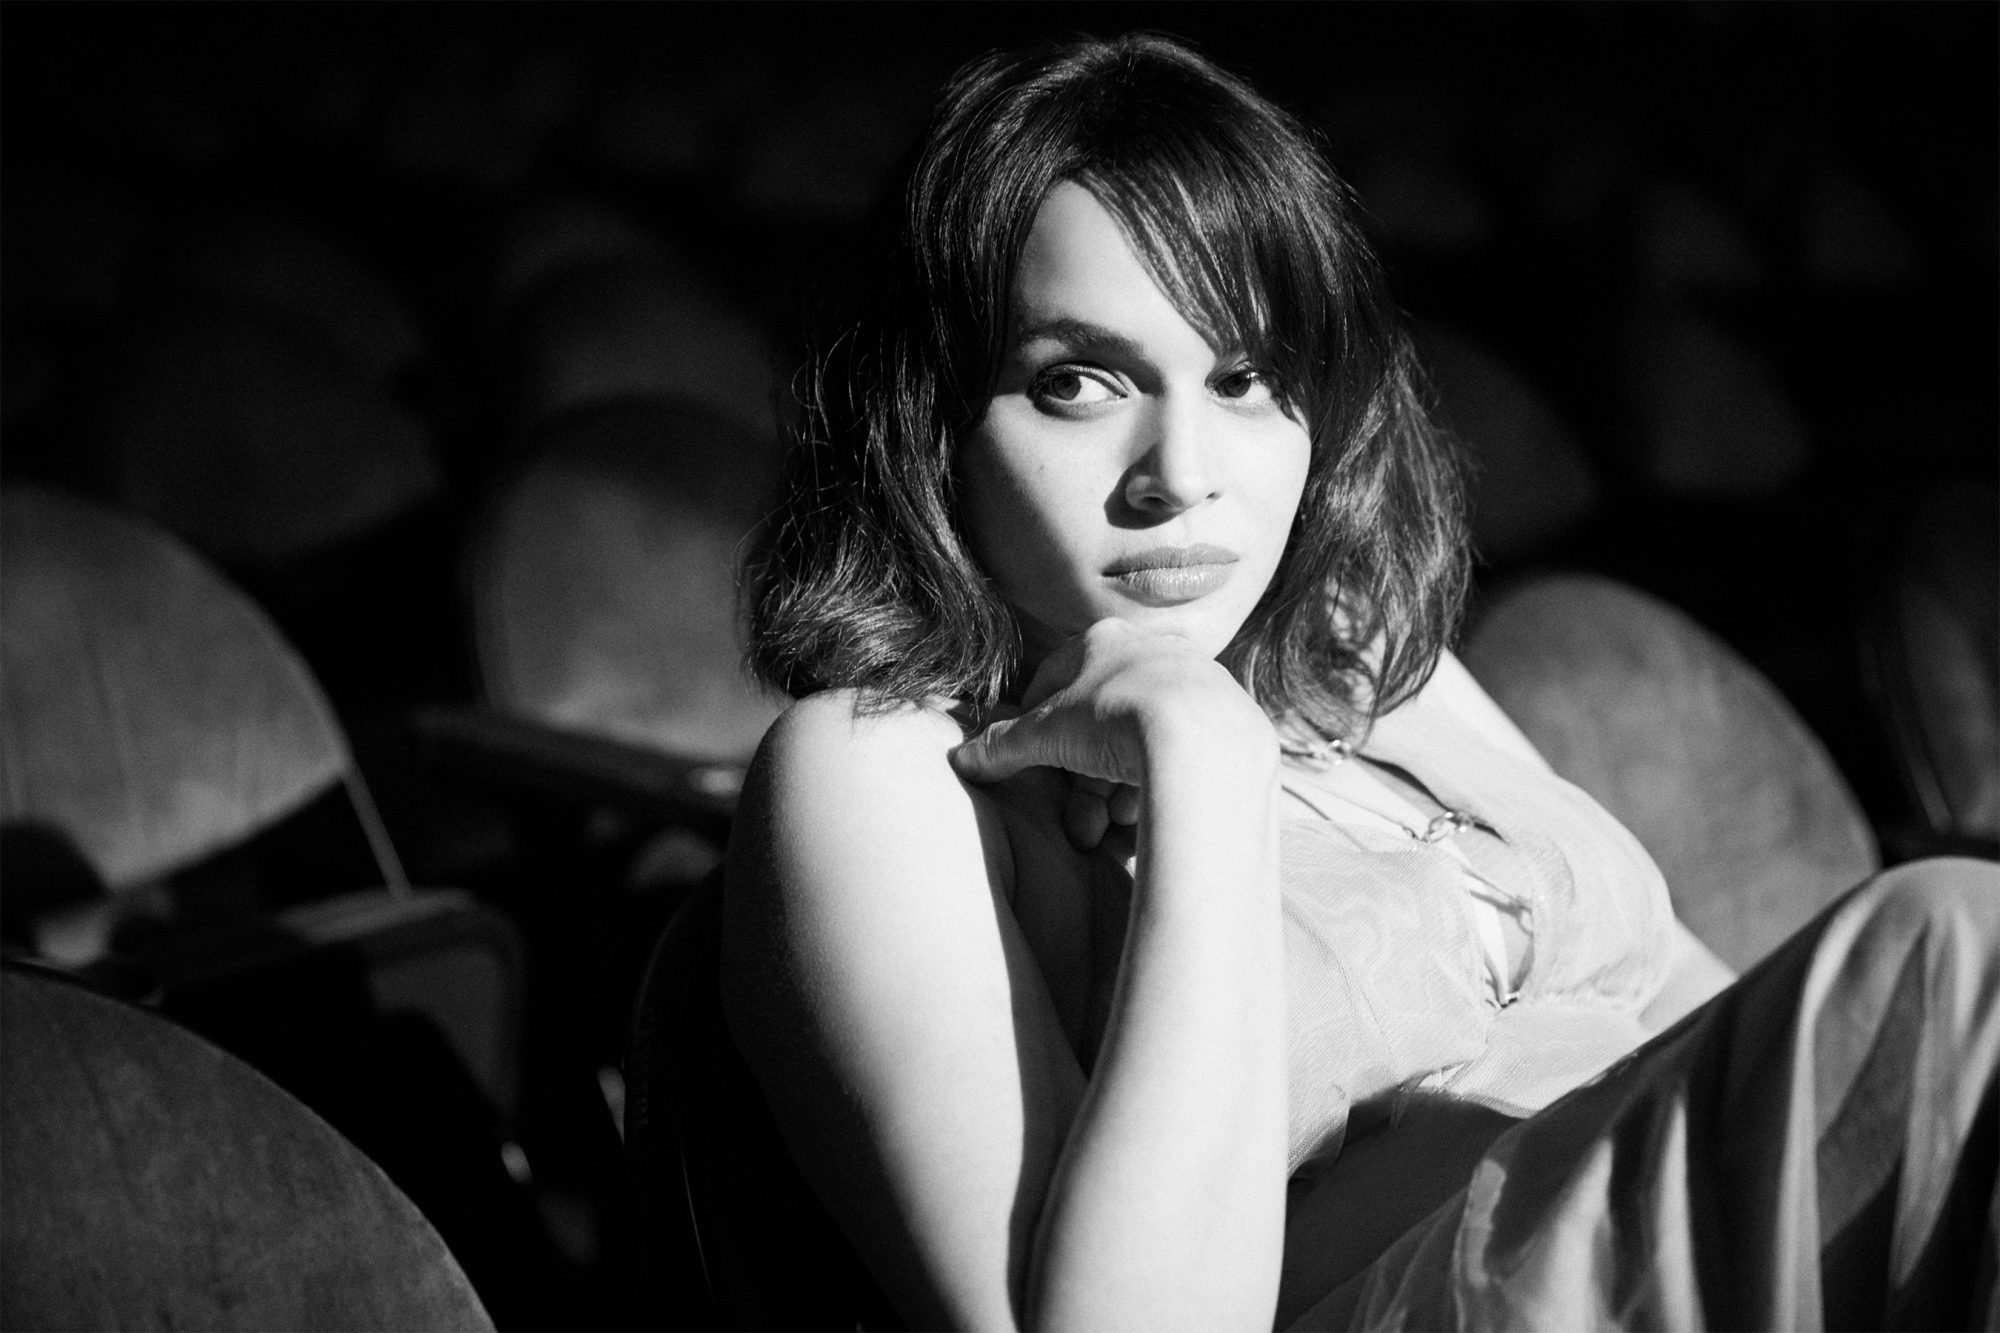 A very happy 42nd birthday to the talented Norah Jones, born this day in 1979.  